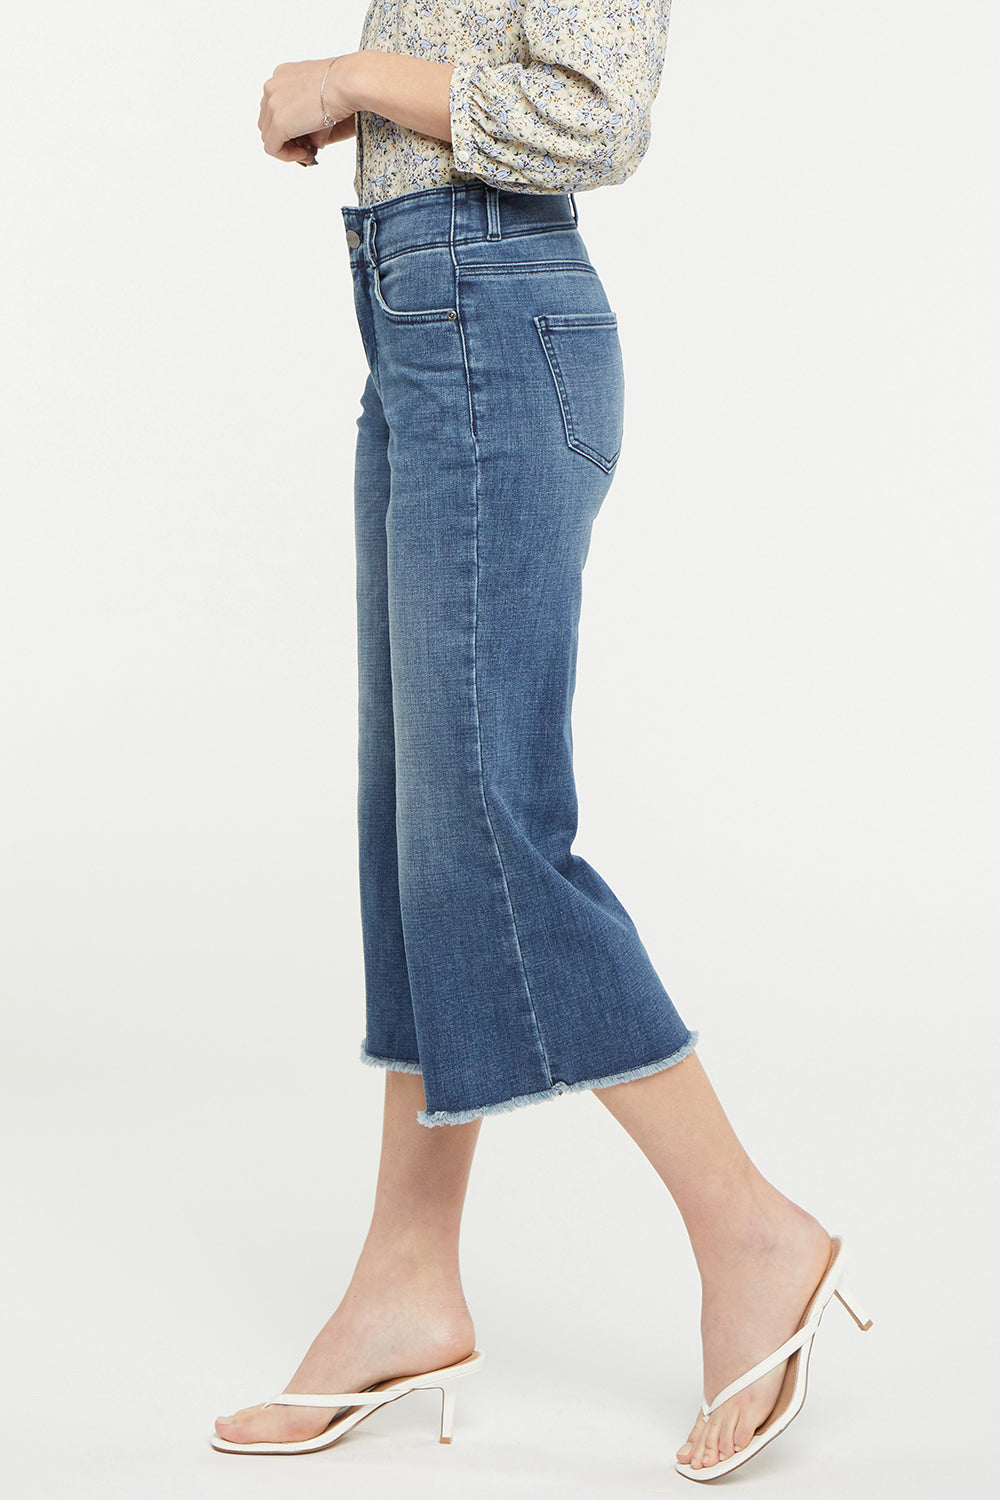 NYDJ Wide Leg Capri Jeans With High Rise And Frayed Hems - Caliente